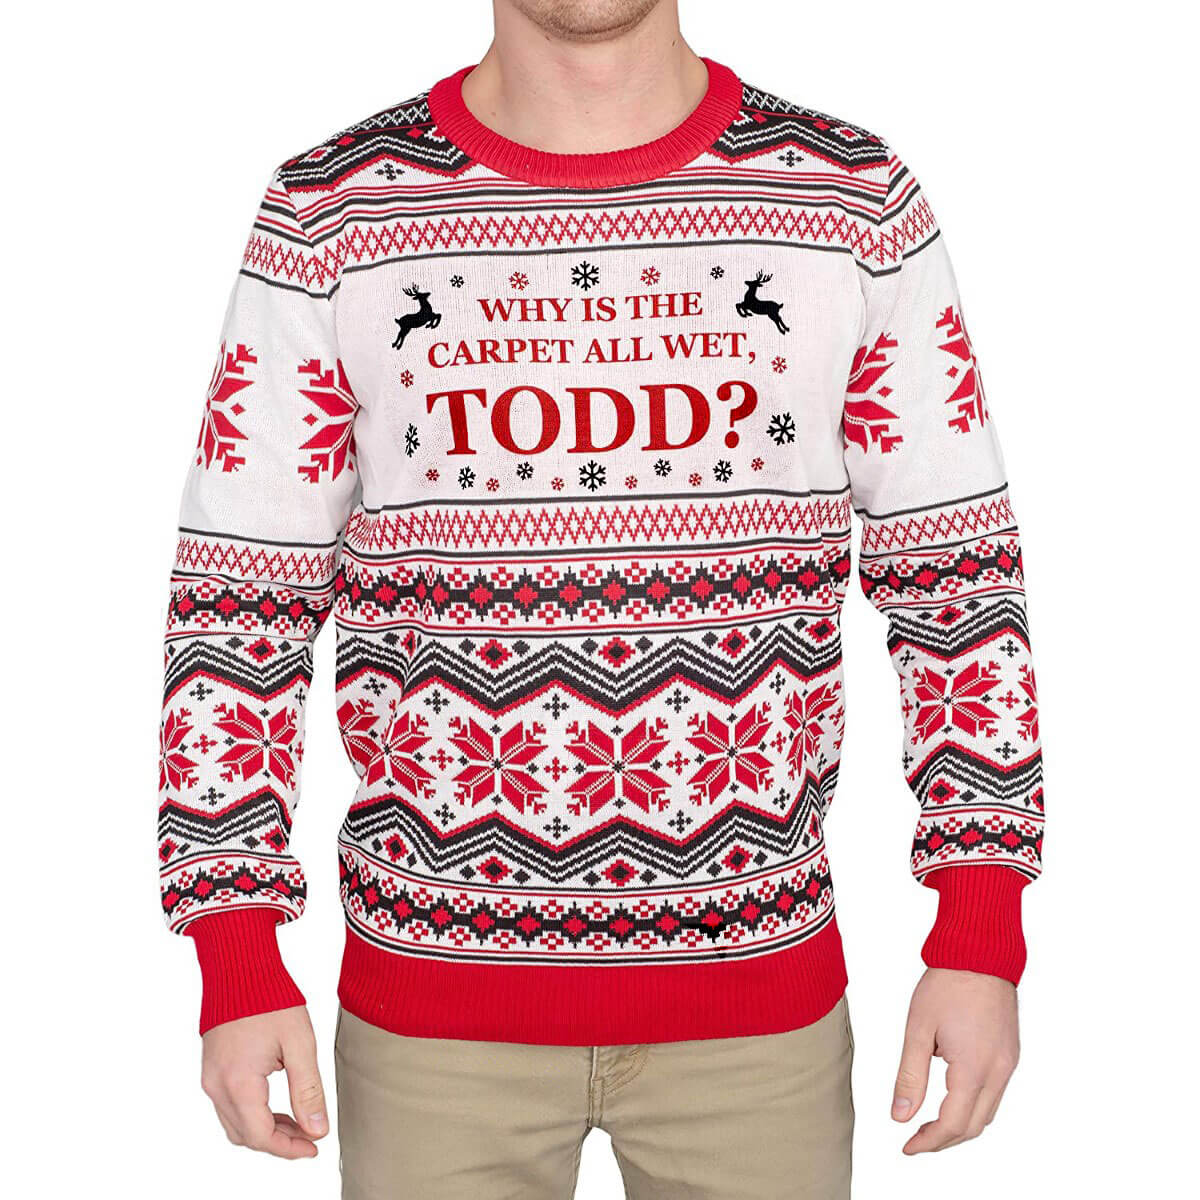 The Carpet All Wet Todd Ugly Sweater